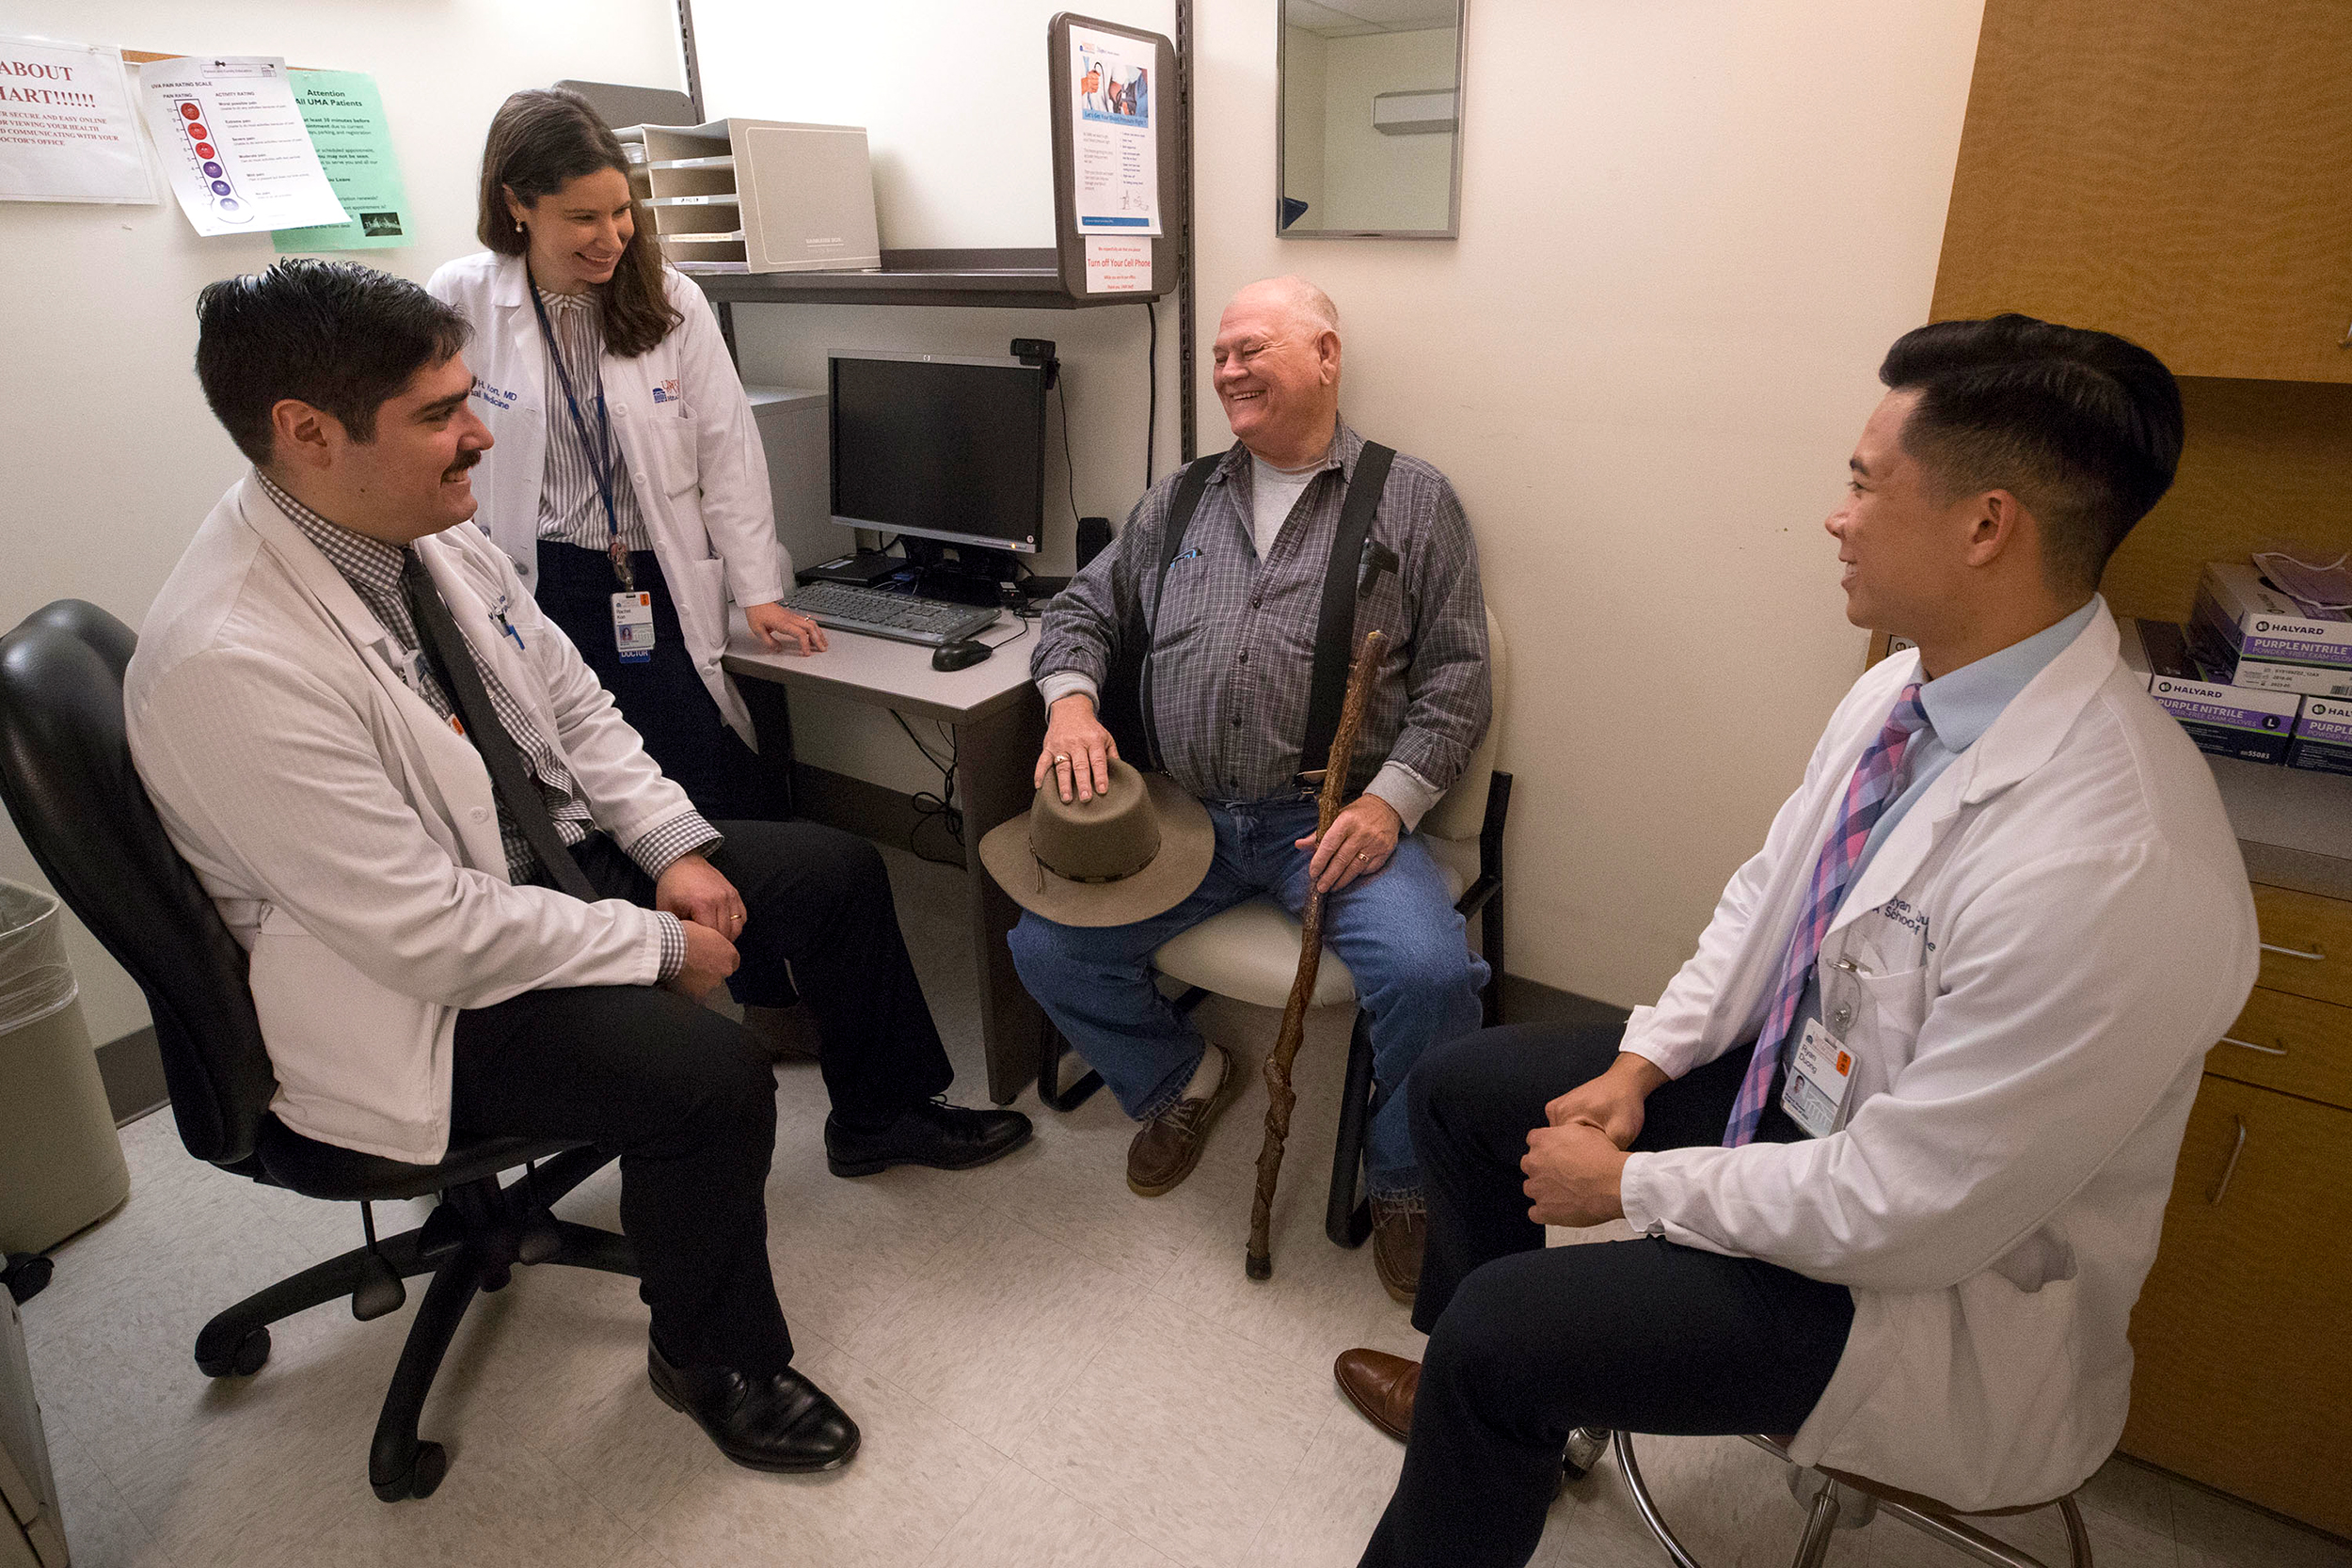 The UVA Health System’s Patient-Student Partnership allows medical students to establish deeper relationships with patients and gives them a real-world context to their academic experiences. (Photo by Dan Addison, University Communications)